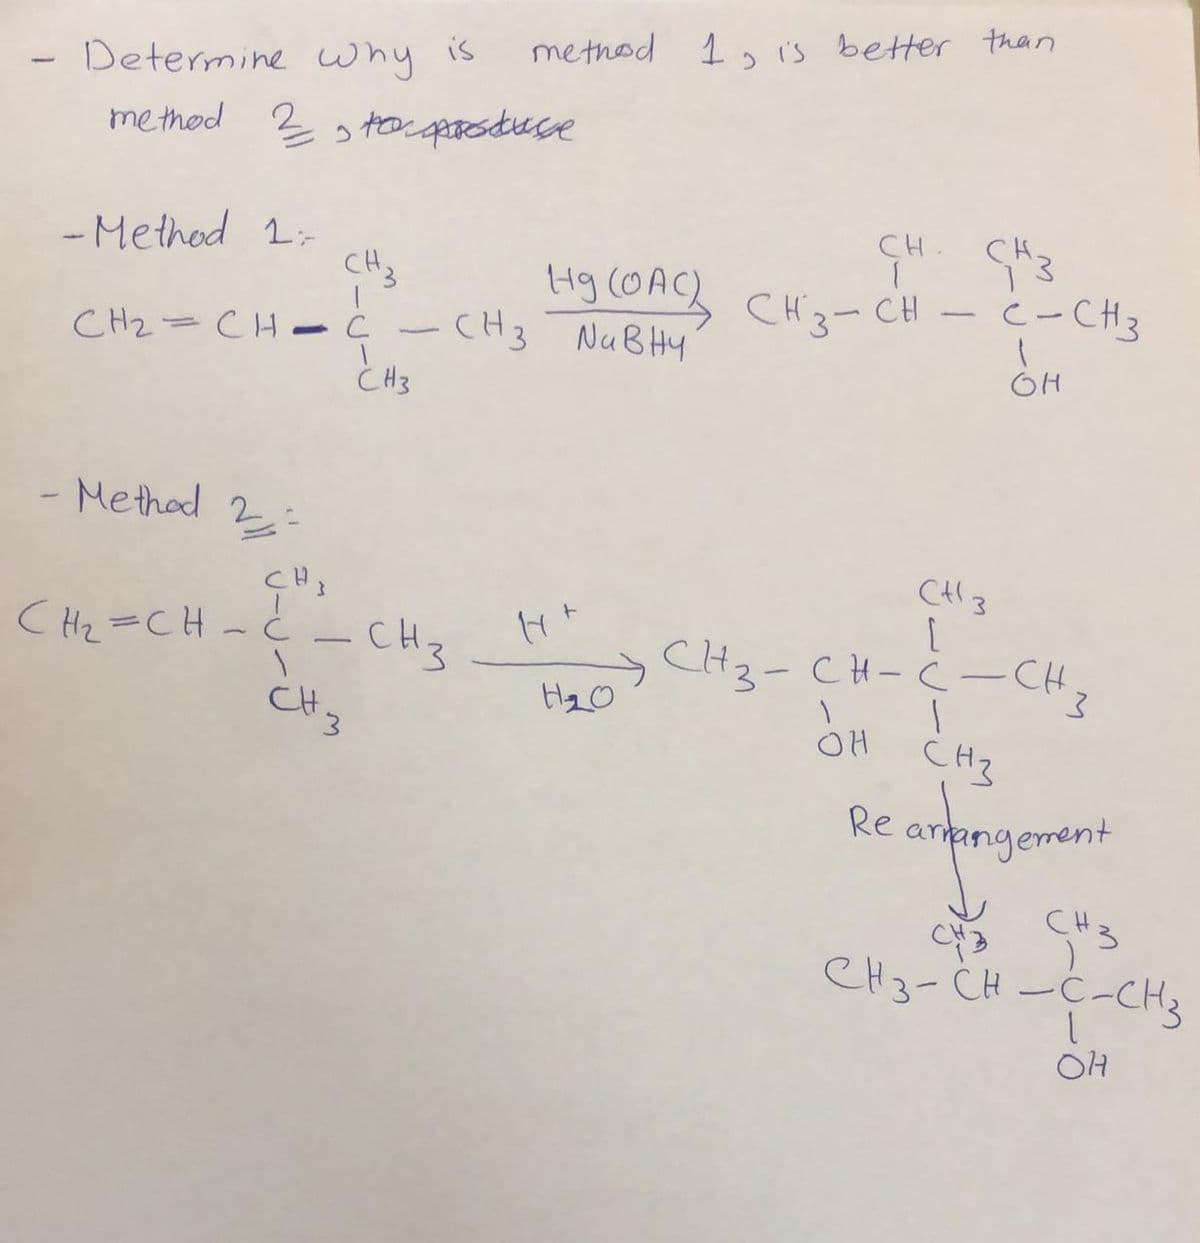 method 1 is better than
Determine why is
methed 2 s teos gpooduce
CH.
CH.
- Method 1:-
Hg (OAC} CH3-CH
CH3
- CH3 NuBHy
c-CH3
CH2=CH - c
CH3
- Methad 2:
C Hz=CH-ċ- CHz
CHz-CH-Ċ-CH
OH CH3
CH.
artangement
Re
C3 CH3
CH3- CH-C-CH3
OH
